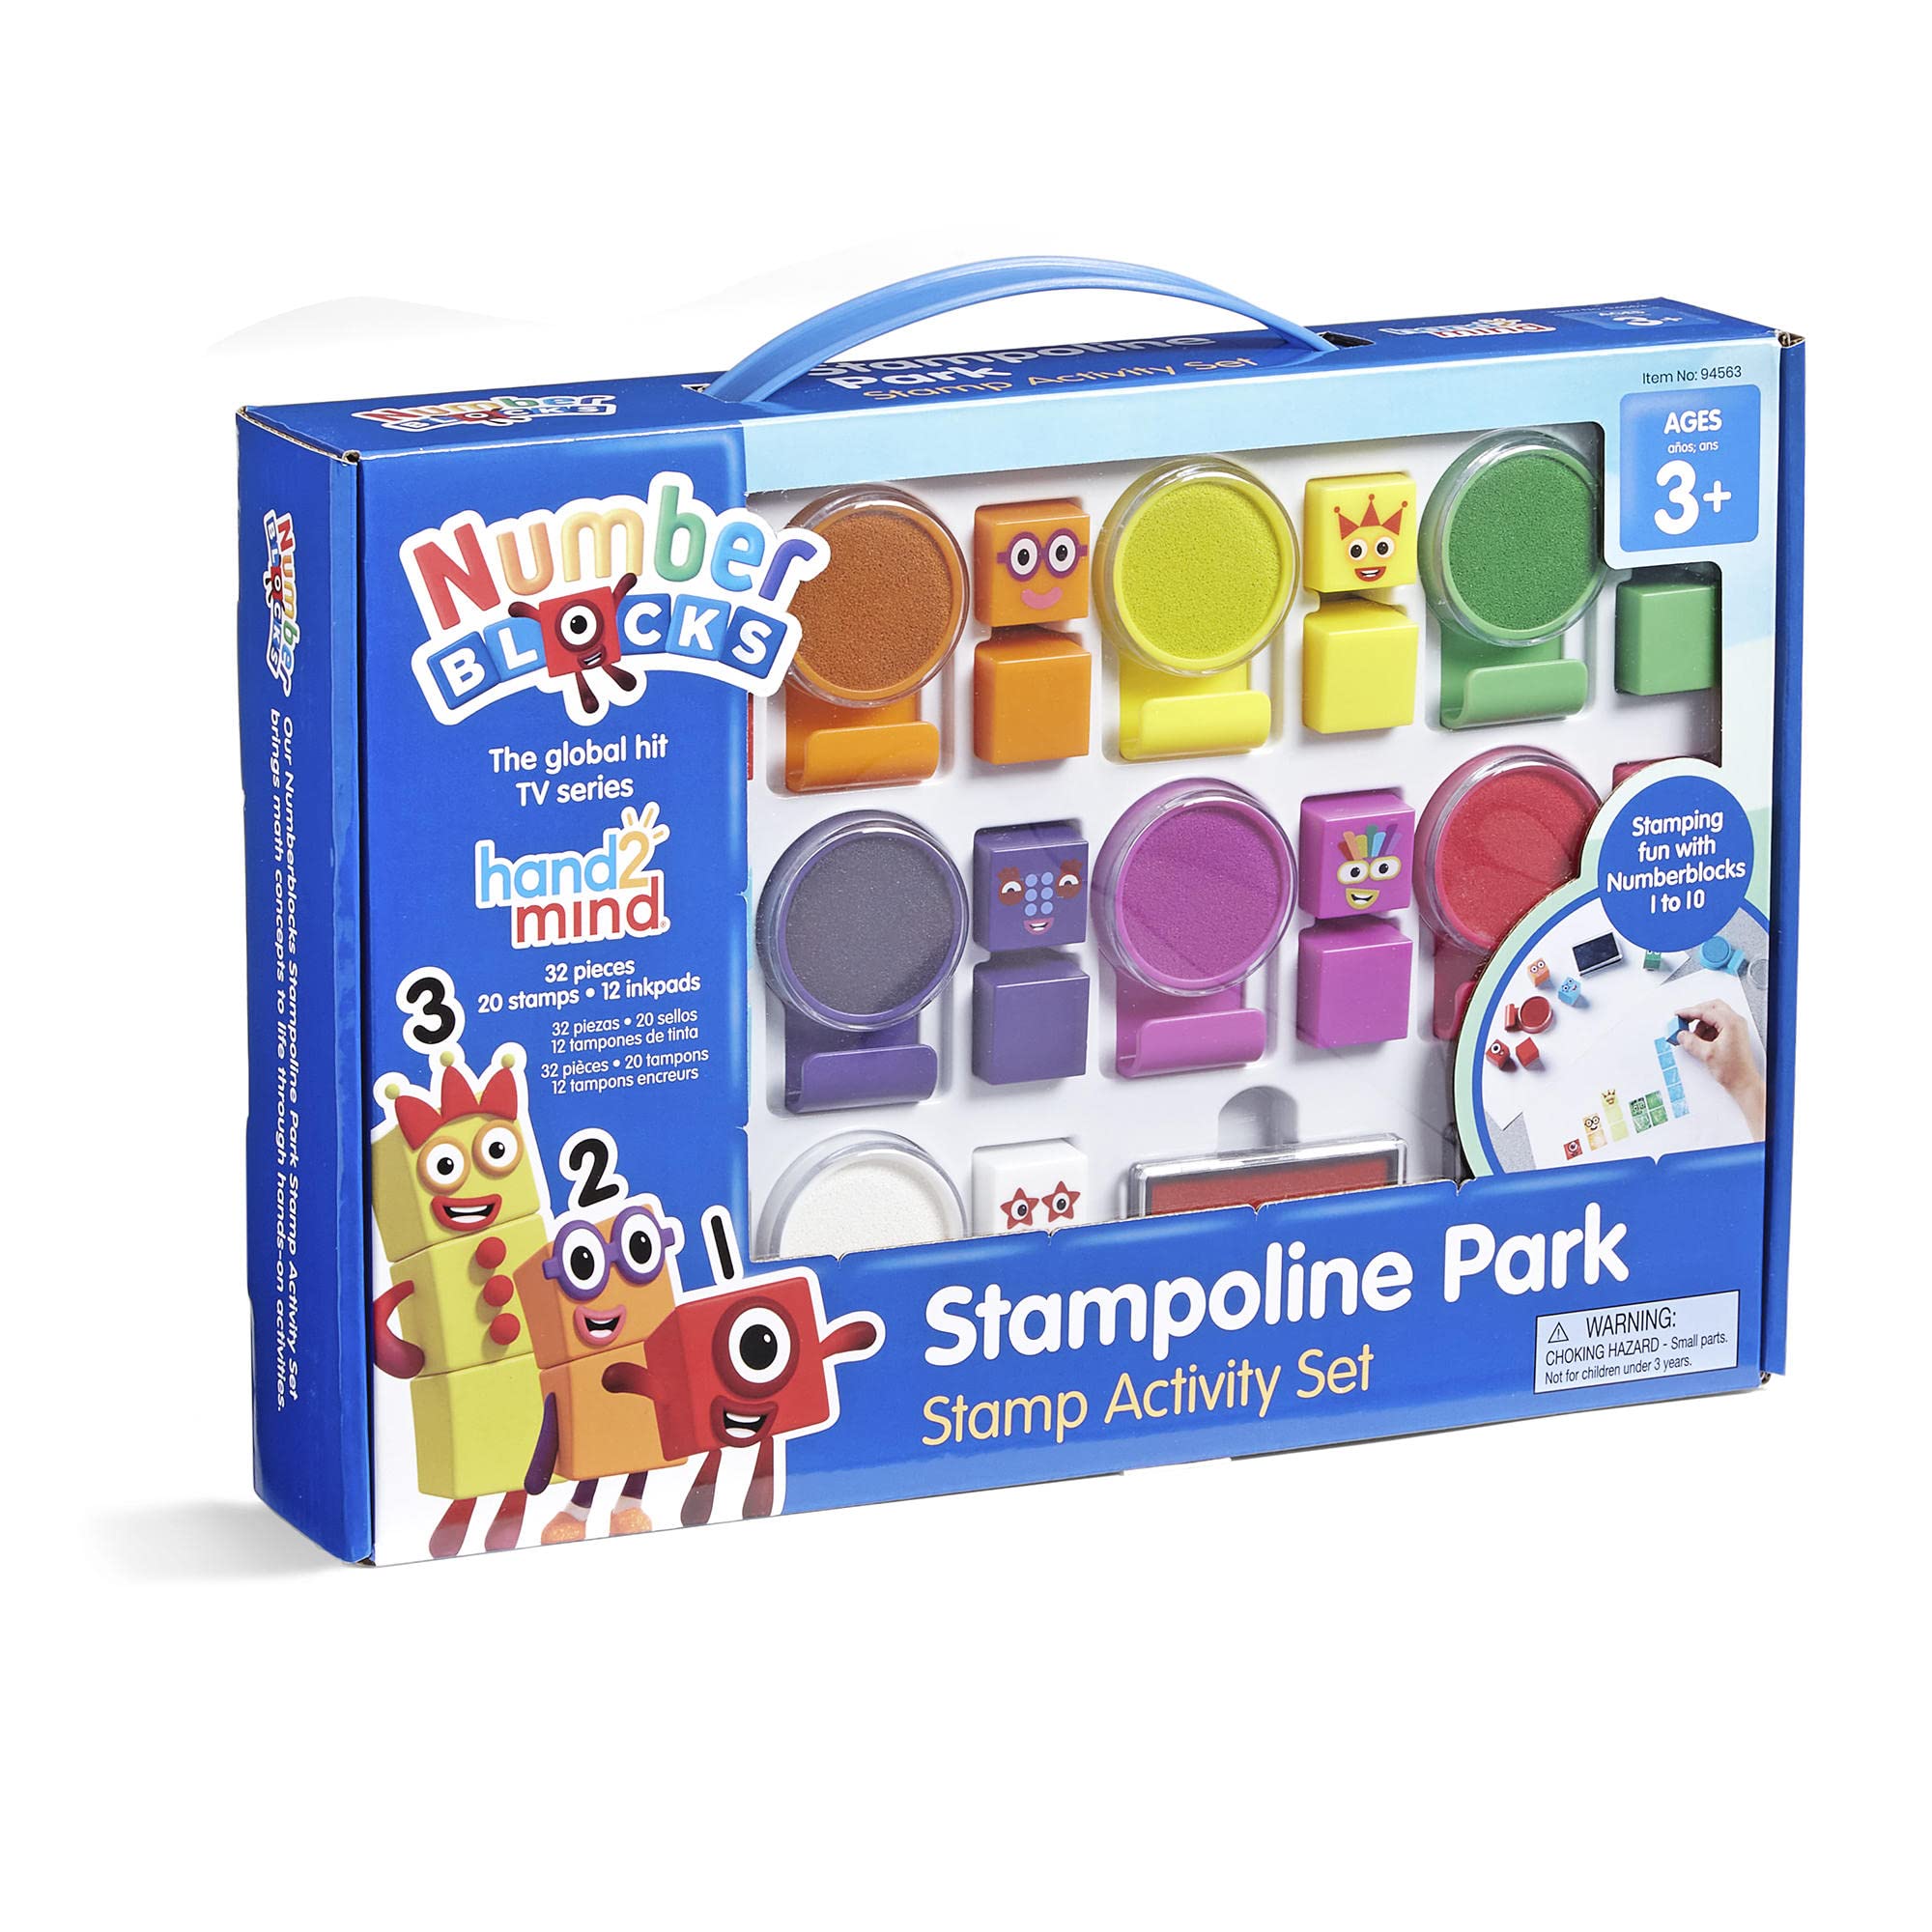 hand2mind Numberblocks Stampoline Park Stamp Activity Set, 20 Kids Stamps, 12 Washable Ink Pads, Number Toys, Toddler Arts and Crafts, Math Teaching Stamps for Kids, Preschool Learning Activities